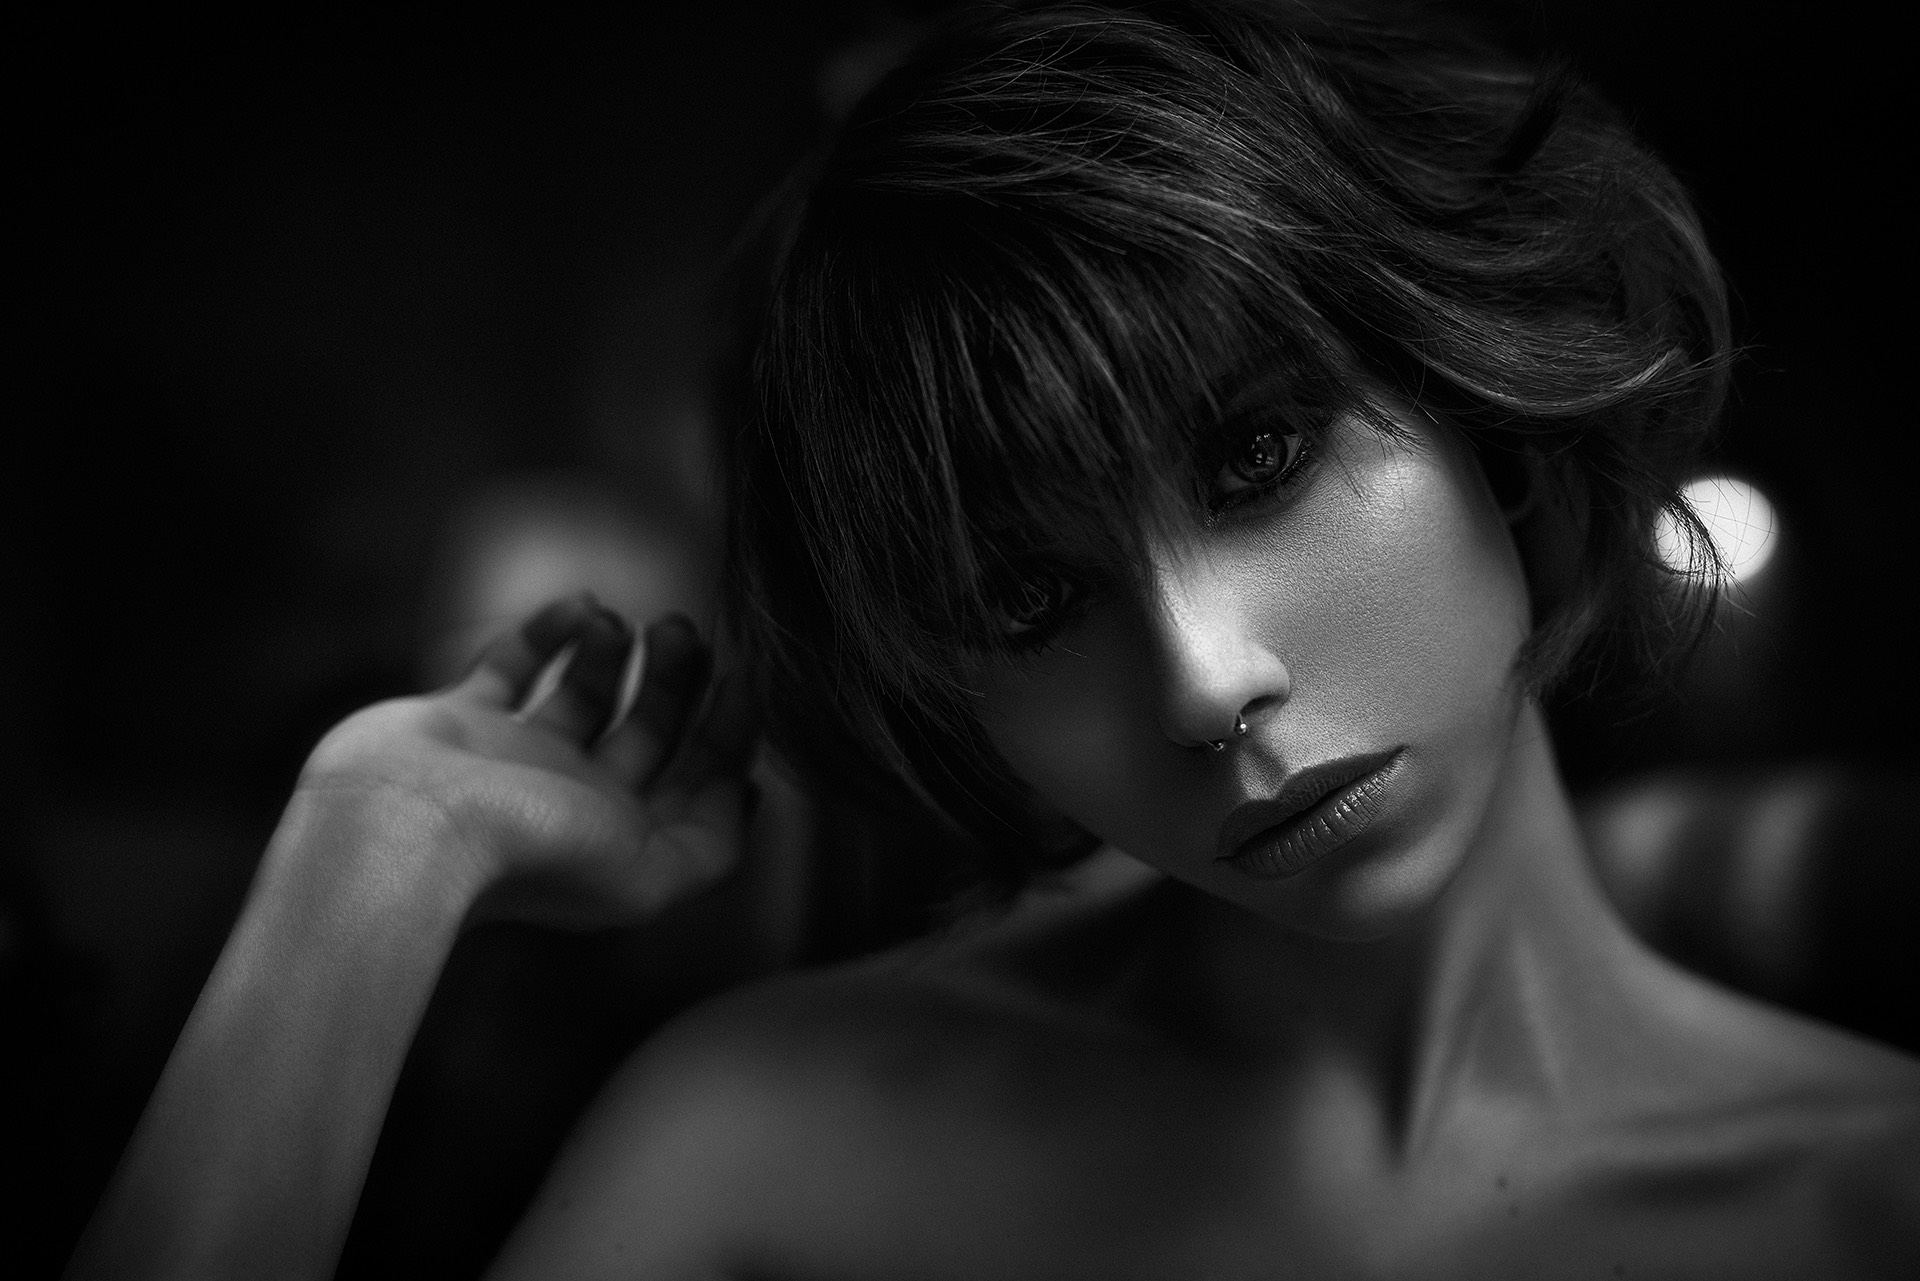 A cinematic black and white beauty portrait in natural light.